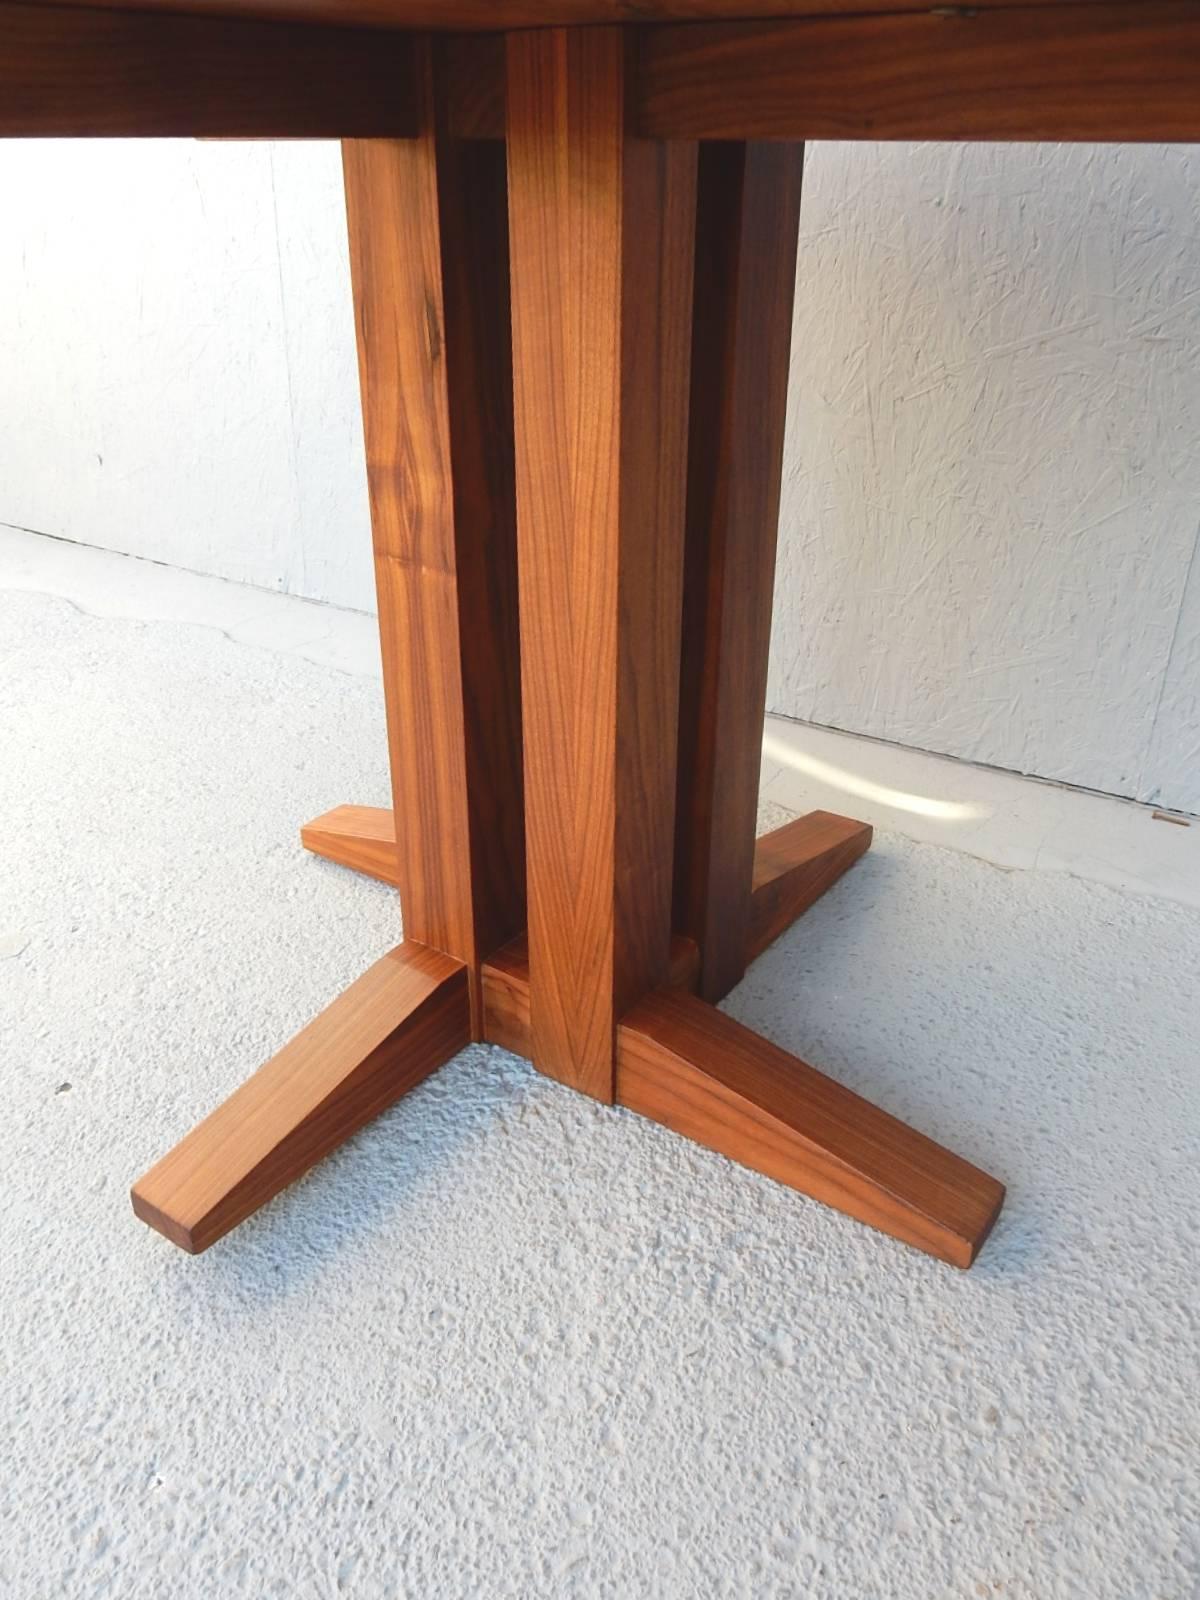 Modern Nakashima Style Sculptural Walnut Slab Table by Actor Nick Offerman, 2006